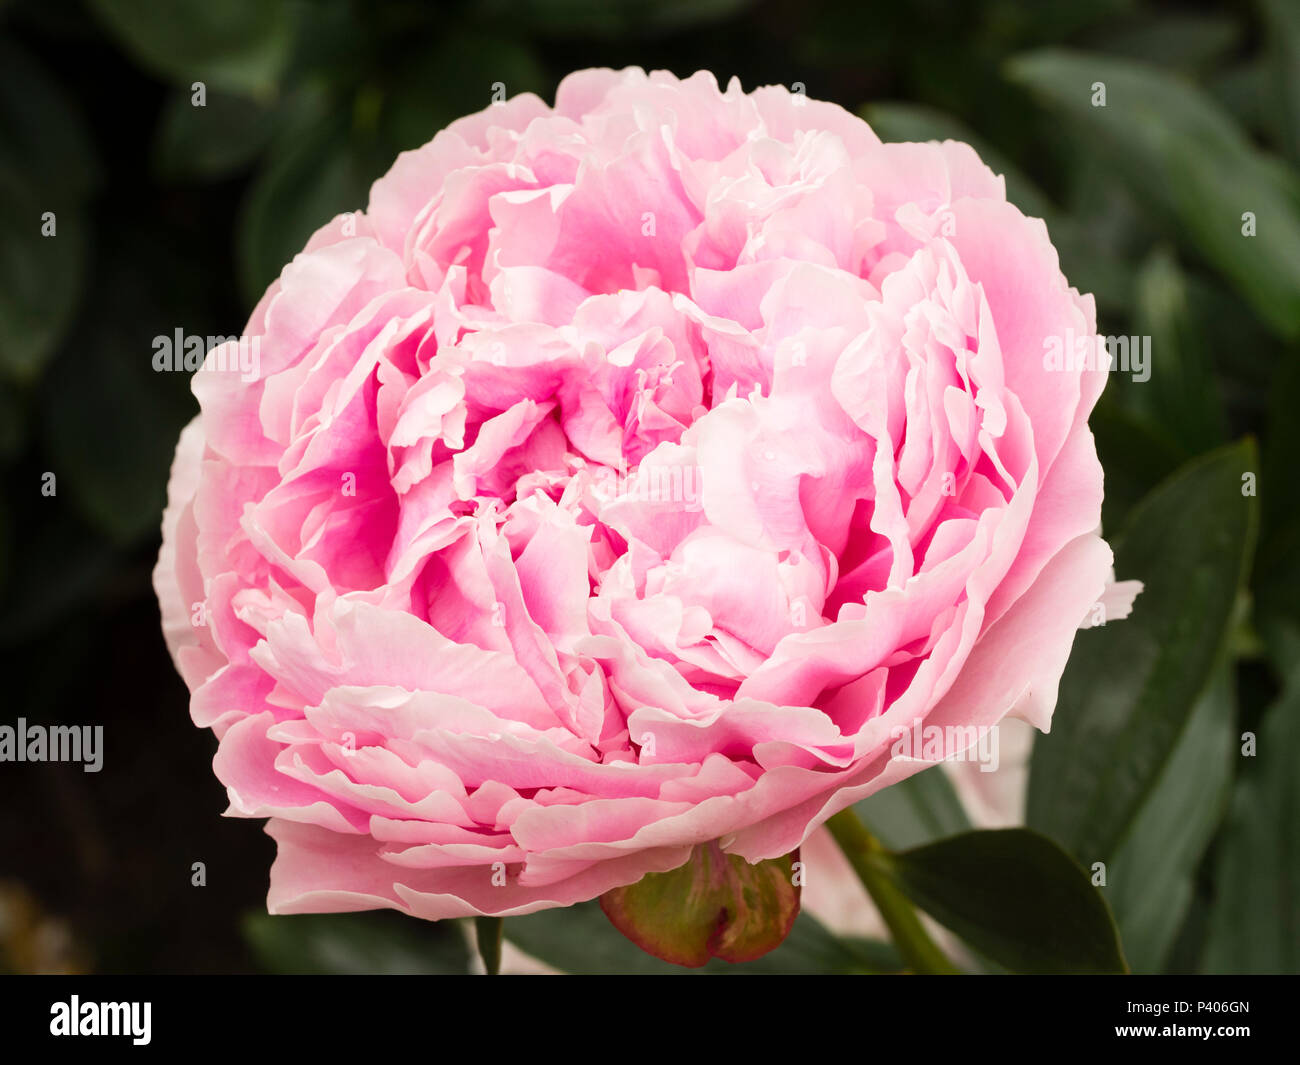 Heavily doubled fragrant pink flower of the early summer blooming herbaceous peony, Paeonia lactiflora 'Sarah Bernhardt' Stock Photo